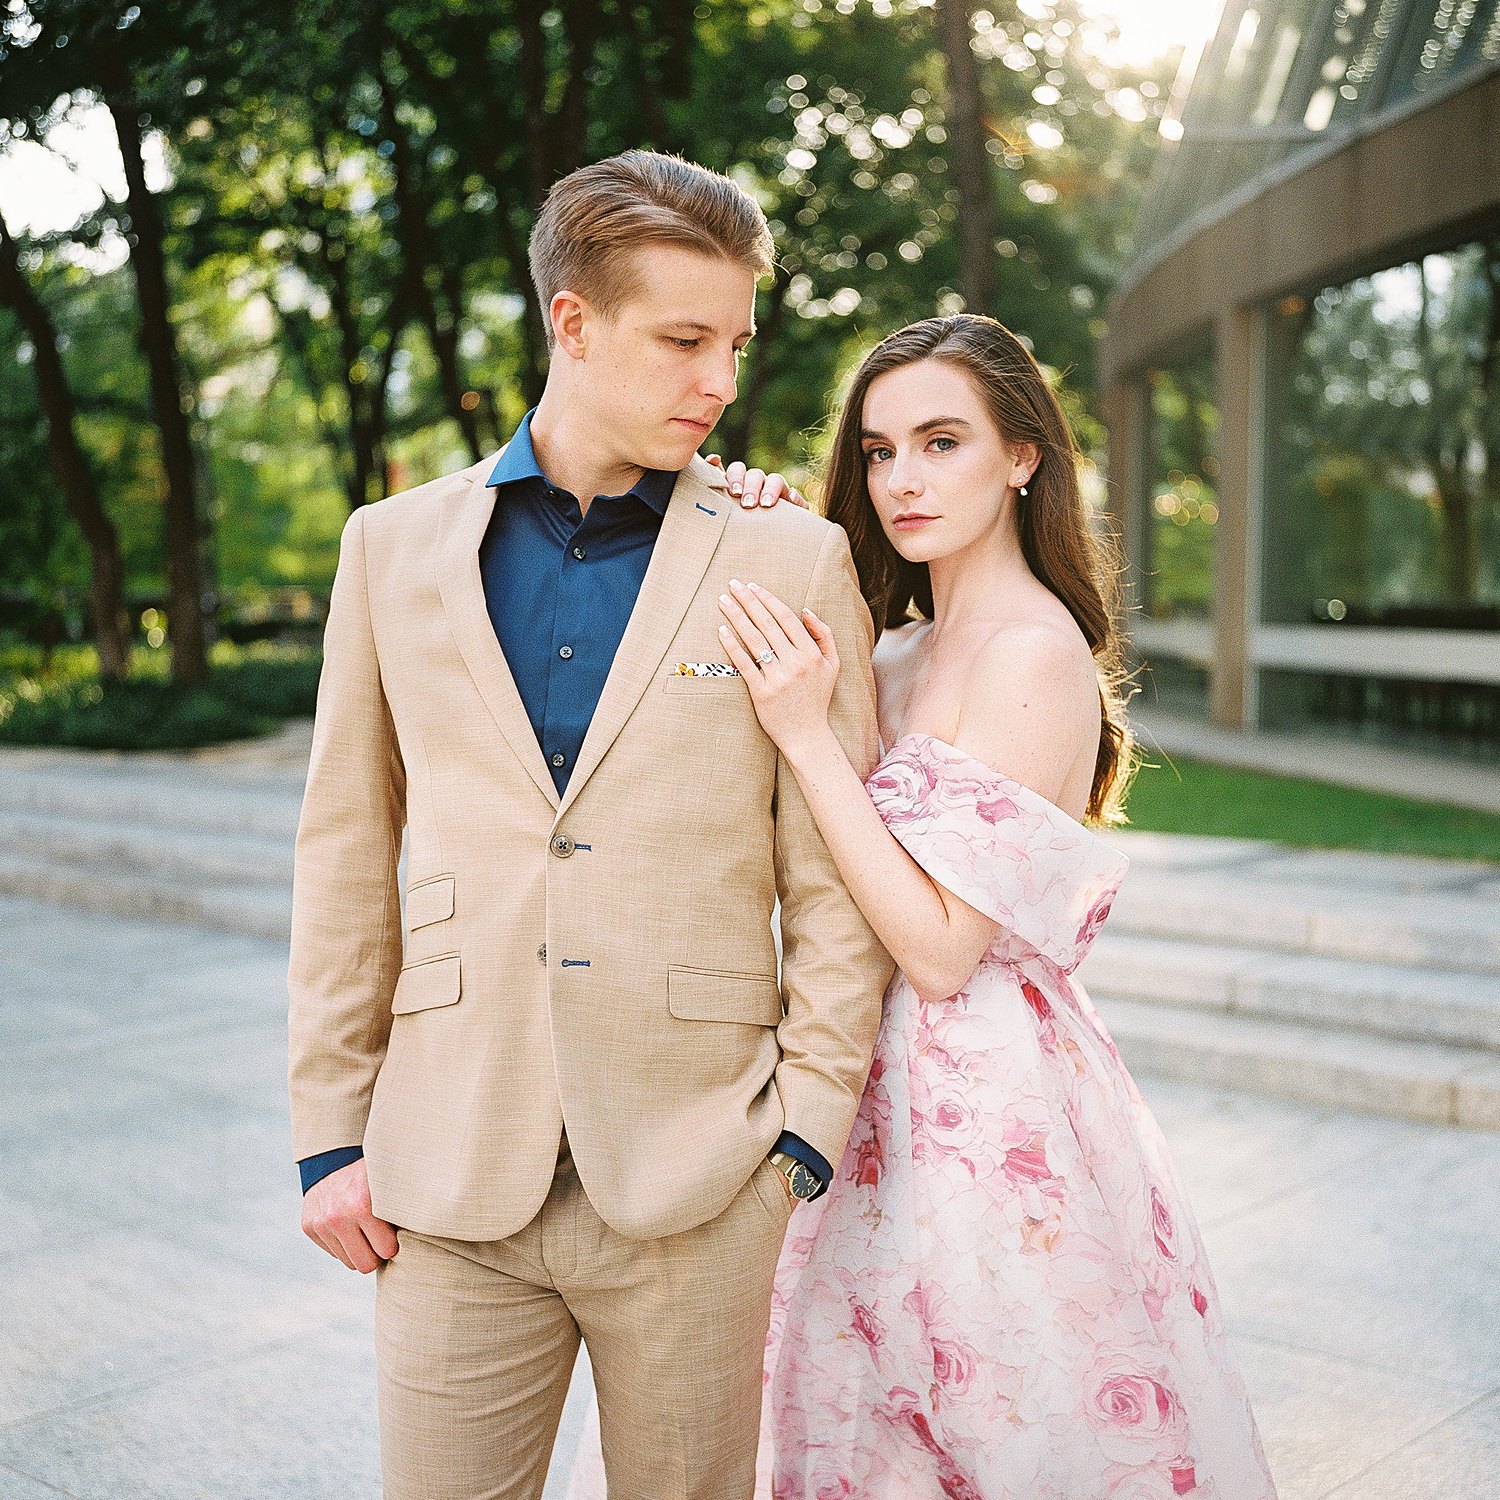 Woman in Pink floral gown arm around man in tan suite and blue shirt with gold watch